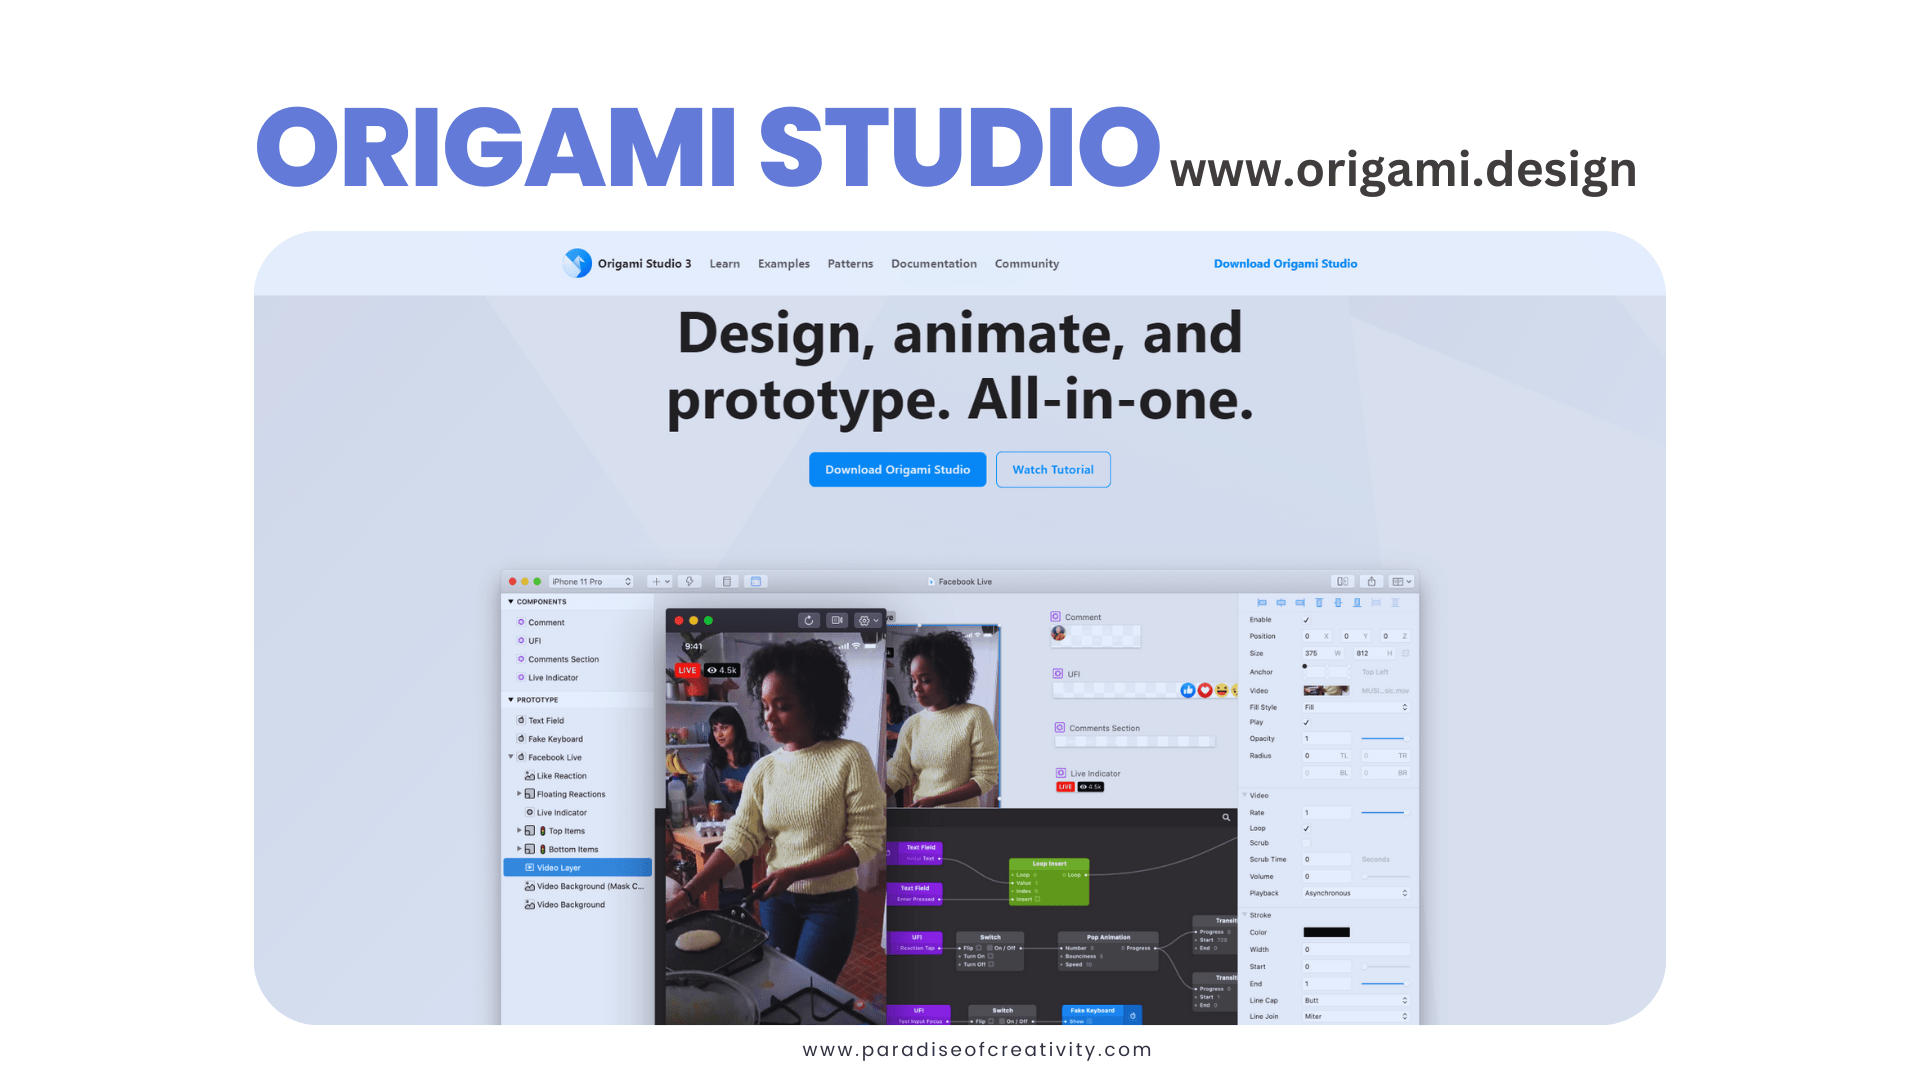 Origami Studio is a powerful prototyping tool that offers a range of advanced features and integrations, making it a great option for designers who need a more robust tool as part of their design system.